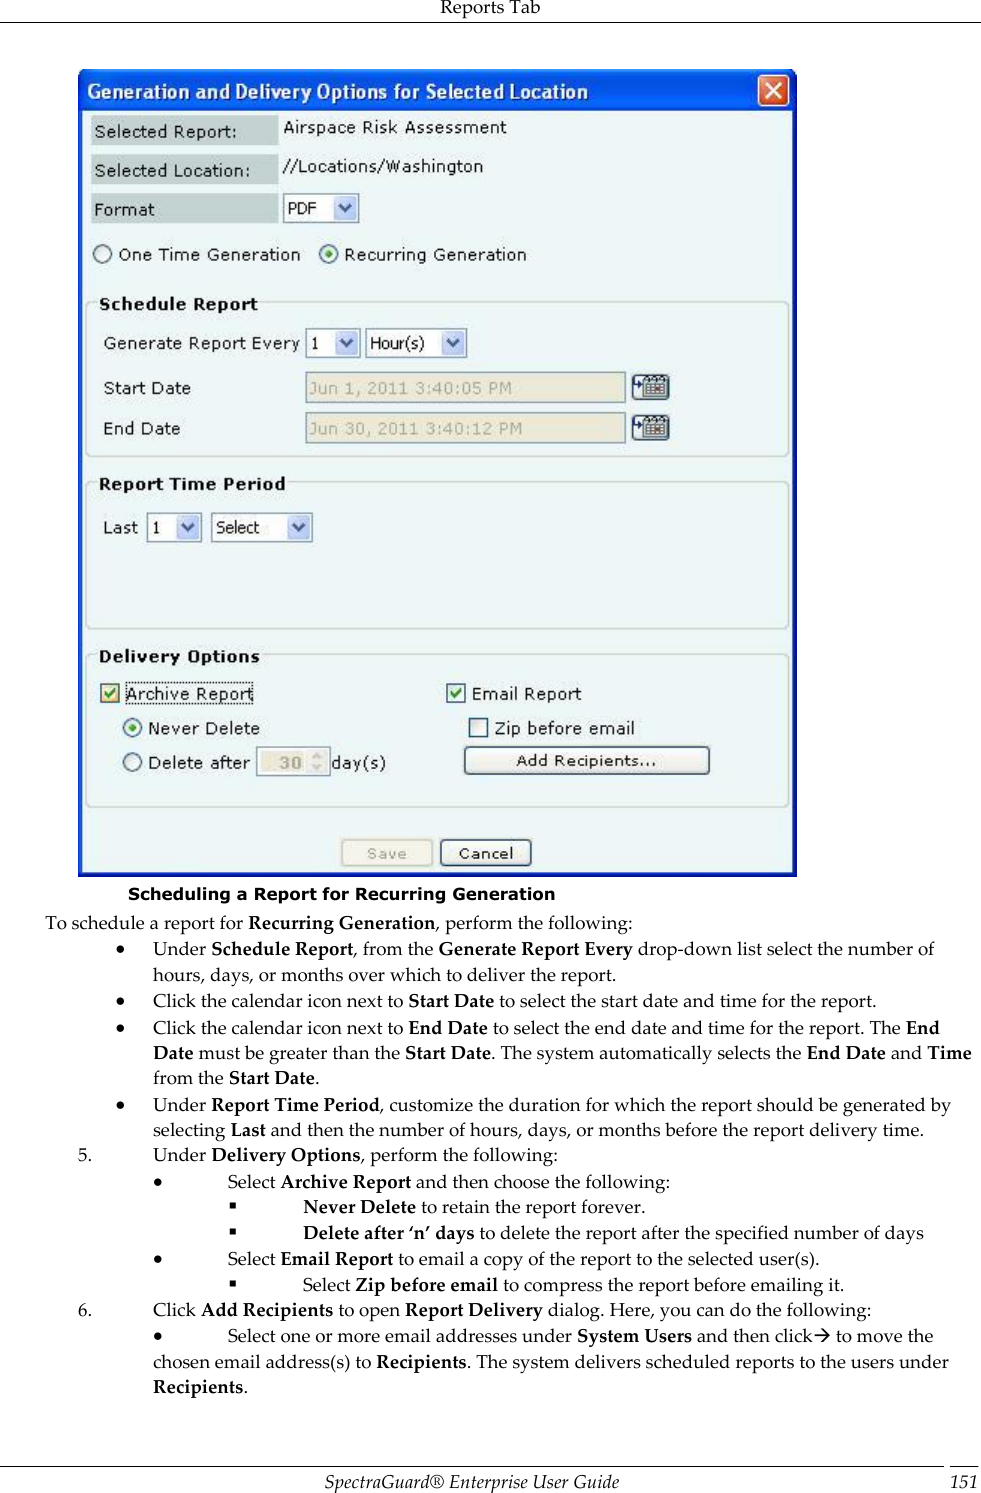 Reports Tab SpectraGuard®  Enterprise User Guide 151  Scheduling a Report for Recurring Generation  To schedule a report for Recurring Generation, perform the following:  Under Schedule Report, from the Generate Report Every drop-down list select the number of hours, days, or months over which to deliver the report.  Click the calendar icon next to Start Date to select the start date and time for the report.  Click the calendar icon next to End Date to select the end date and time for the report. The End Date must be greater than the Start Date. The system automatically selects the End Date and Time from the Start Date.  Under Report Time Period, customize the duration for which the report should be generated by selecting Last and then the number of hours, days, or months before the report delivery time. 5. Under Delivery Options, perform the following:  Select Archive Report and then choose the following:  Never Delete to retain the report forever.  Delete after ‘n’ days to delete the report after the specified number of days  Select Email Report to email a copy of the report to the selected user(s).  Select Zip before email to compress the report before emailing it. 6. Click Add Recipients to open Report Delivery dialog. Here, you can do the following:  Select one or more email addresses under System Users and then click to move the chosen email address(s) to Recipients. The system delivers scheduled reports to the users under Recipients. 